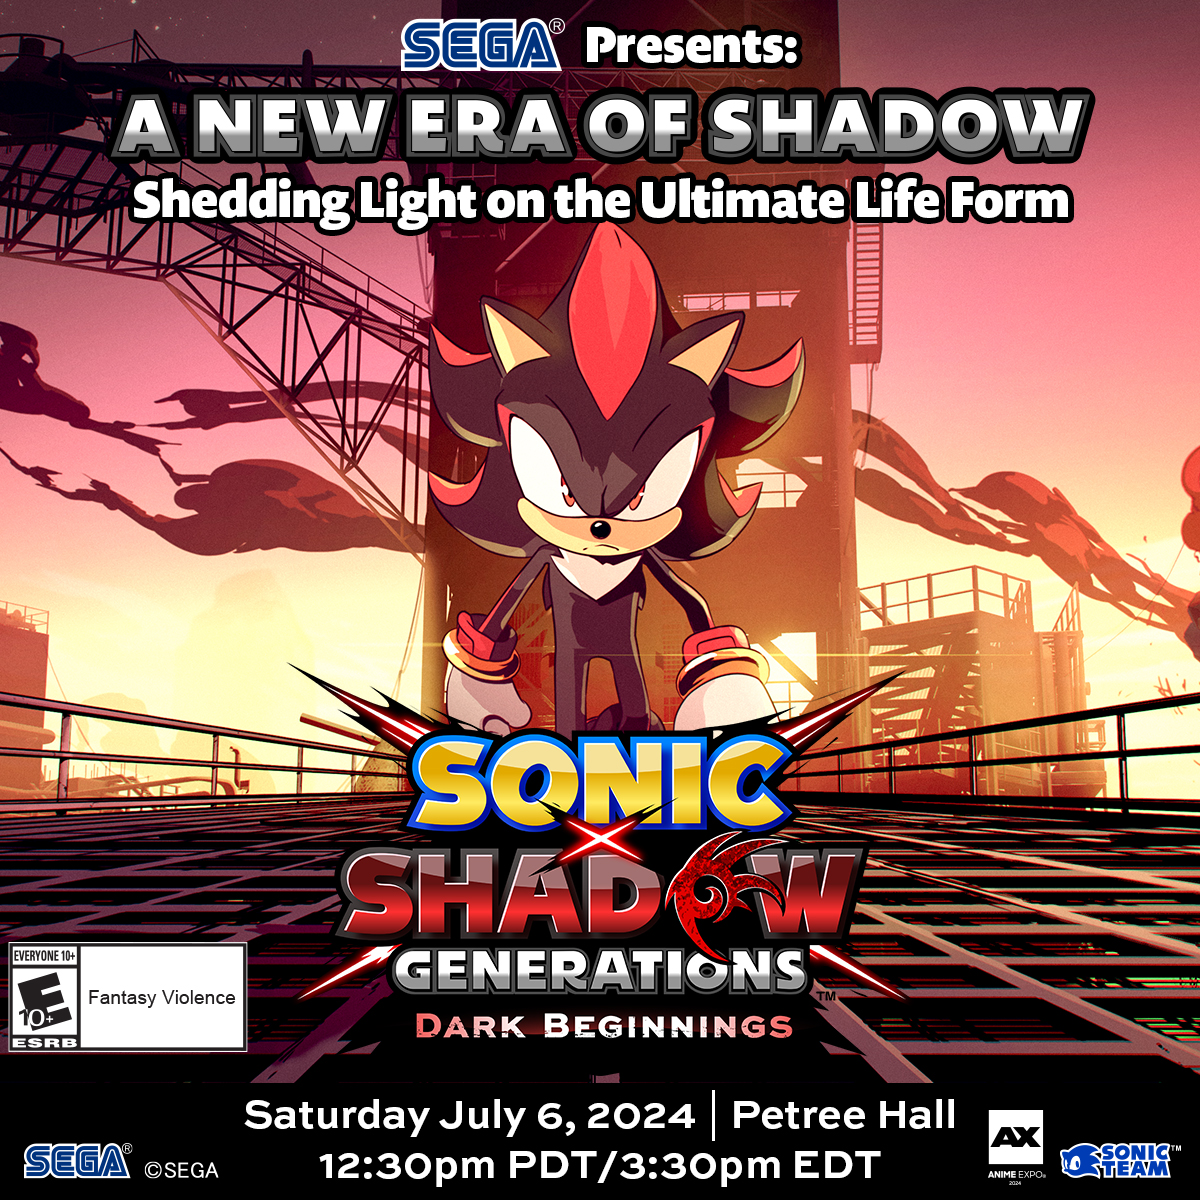 Join special guests including Takashi Iizuka, Kirk Thornton, and @stephaniesheh at our Anime Expo panel all about Shadow and our upcoming animation Sonic x Shadow Generations: Dark Beginnings! Send your questions here by 5/31 for a chance to be answered in the panel!